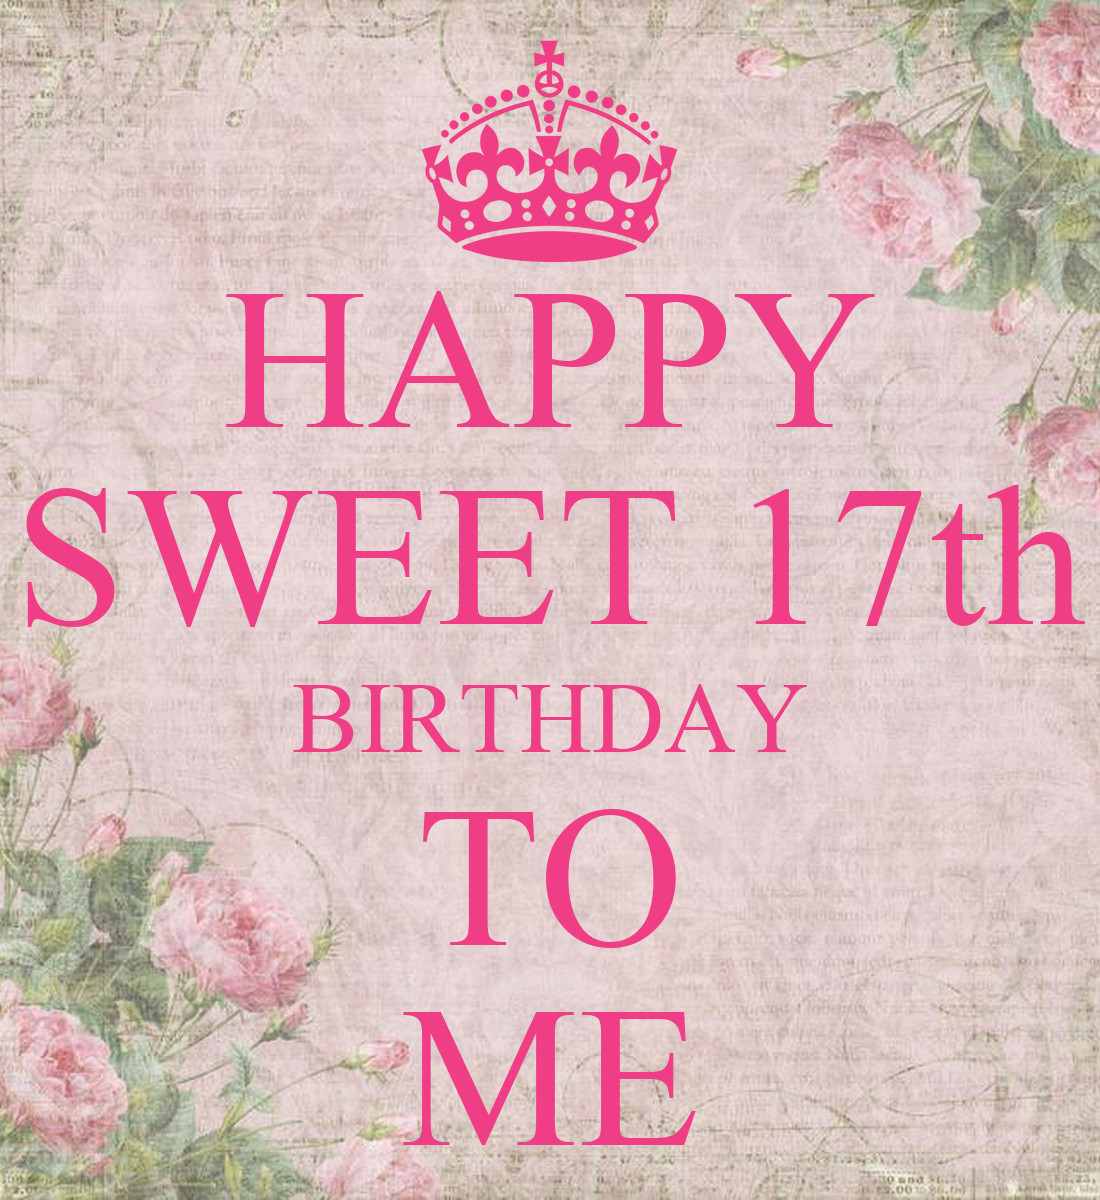 Sweetest Birthday Quotes
 Sweet 17th Birthday Quotes For Girls QuotesGram